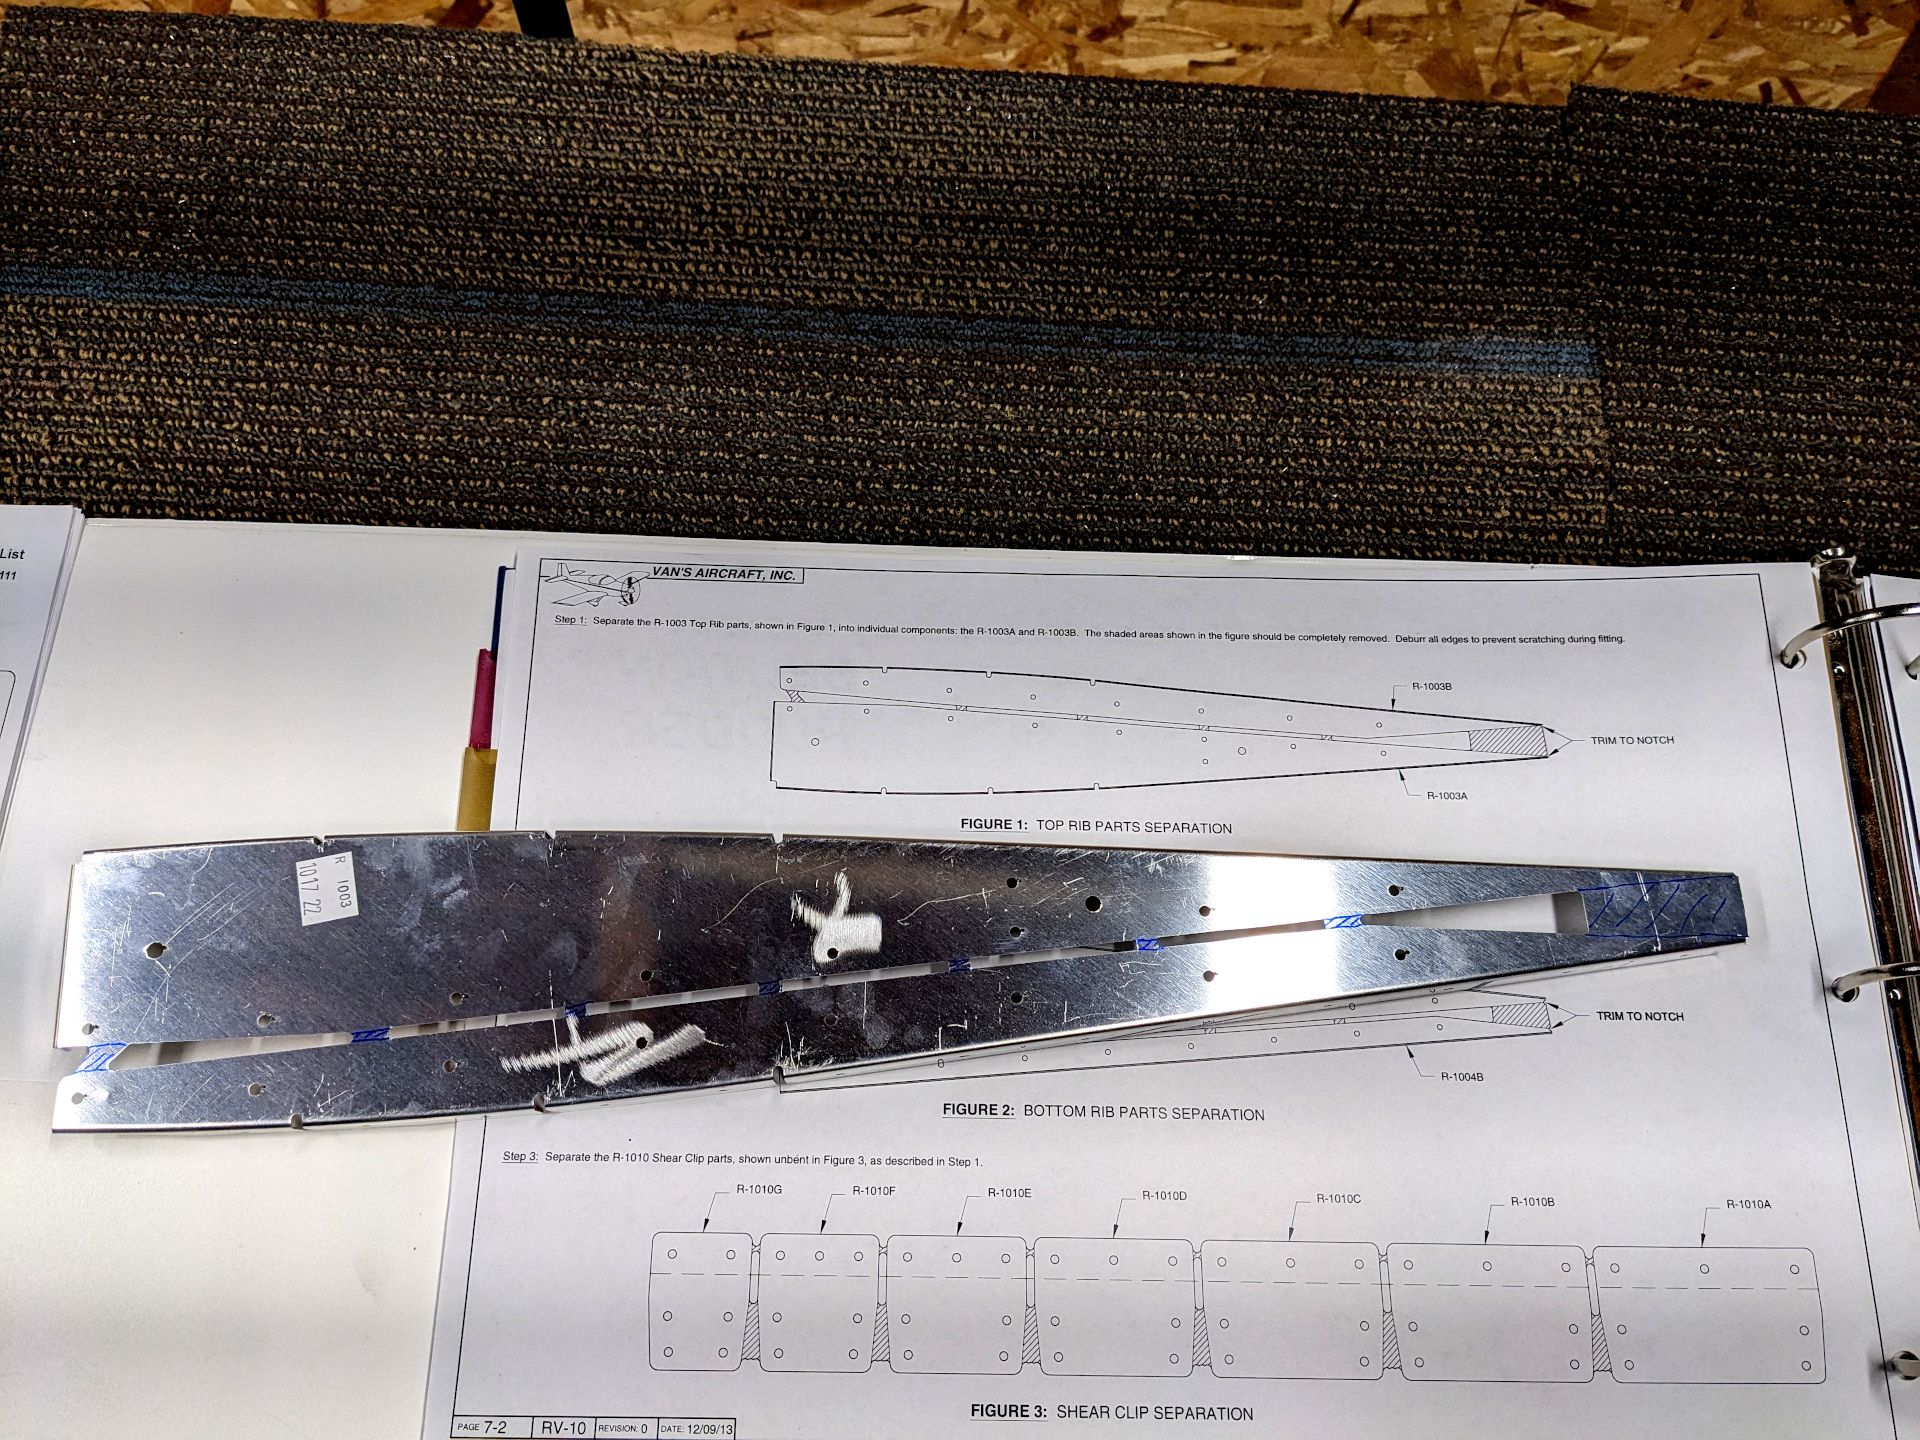 Aluminum part marked up for cutting. It is sitting on the instruction manual that is detailing the cuts